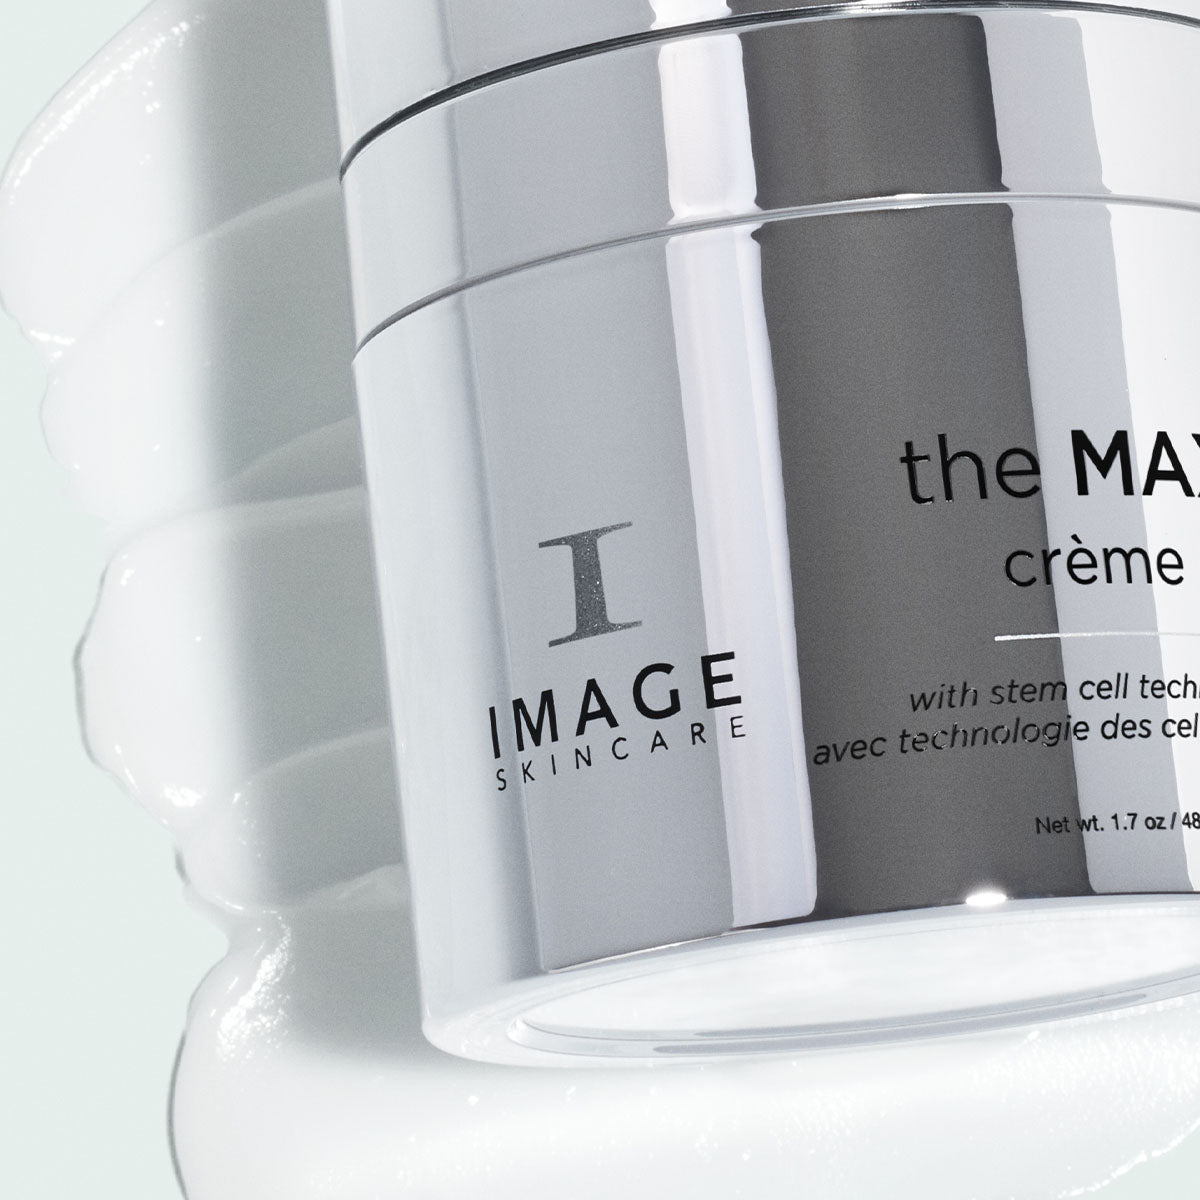 Experience the power of stem cell technology with The Max Stem Cell Creme by IMAGE SKINCARE. This advanced formula is enriched with plant-based stem cells and peptides to rejuvenate and hydrate the skin. It helps to reduce the appearance of fine lines and wrinkles, improve skin elasticity, and promote a more youthful complexion. Indulge in the ultimate skincare treatment with The Max Stem Cell Creme.